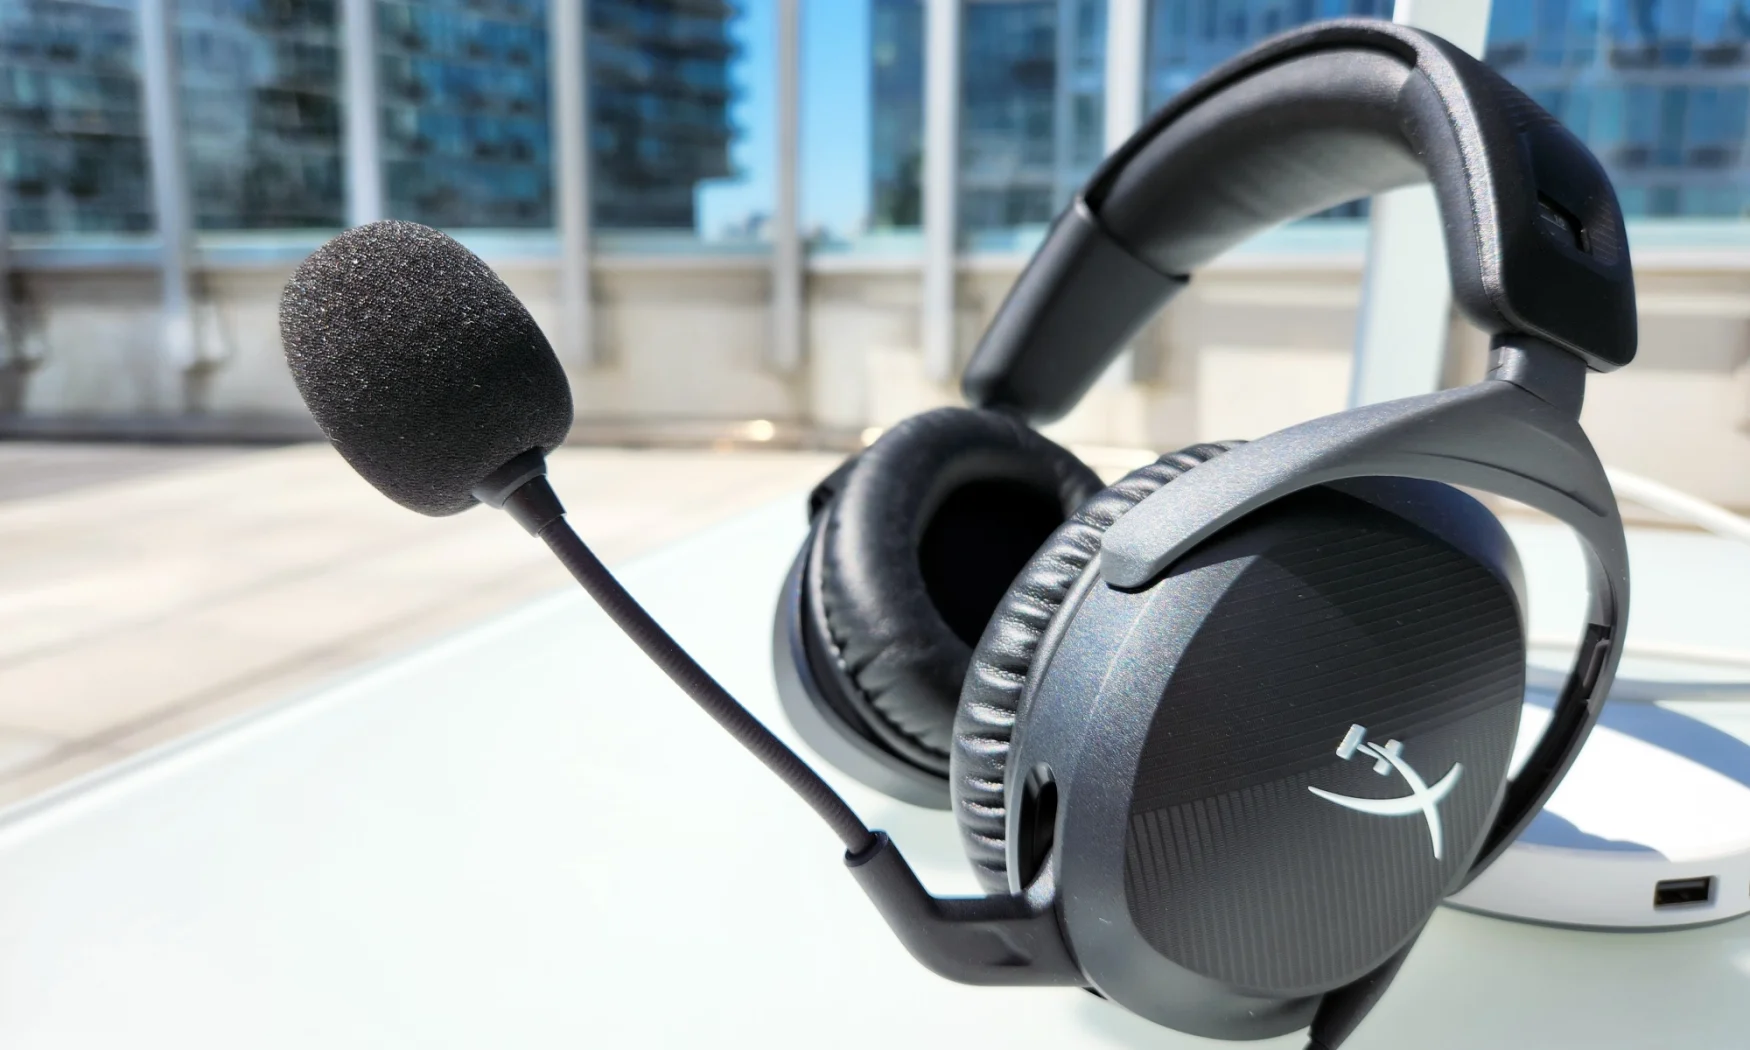 A black gaming headset with a built-in boom microphone, the HyperX Cloud Stinger 2, rests on a white table in an outdoors setting.